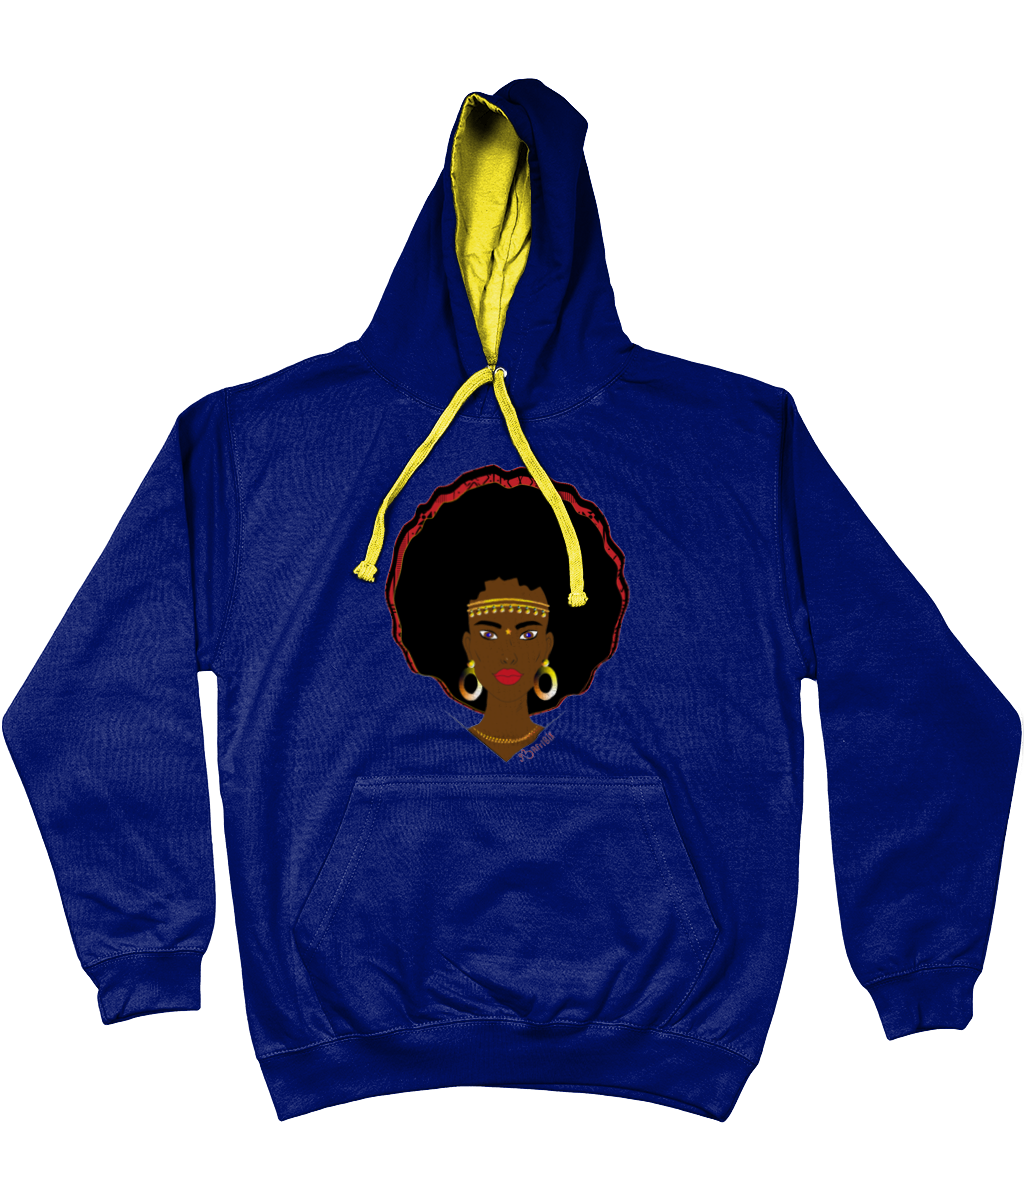 AfriBix Warrior Unisex Hoodie with a contrast hood and string